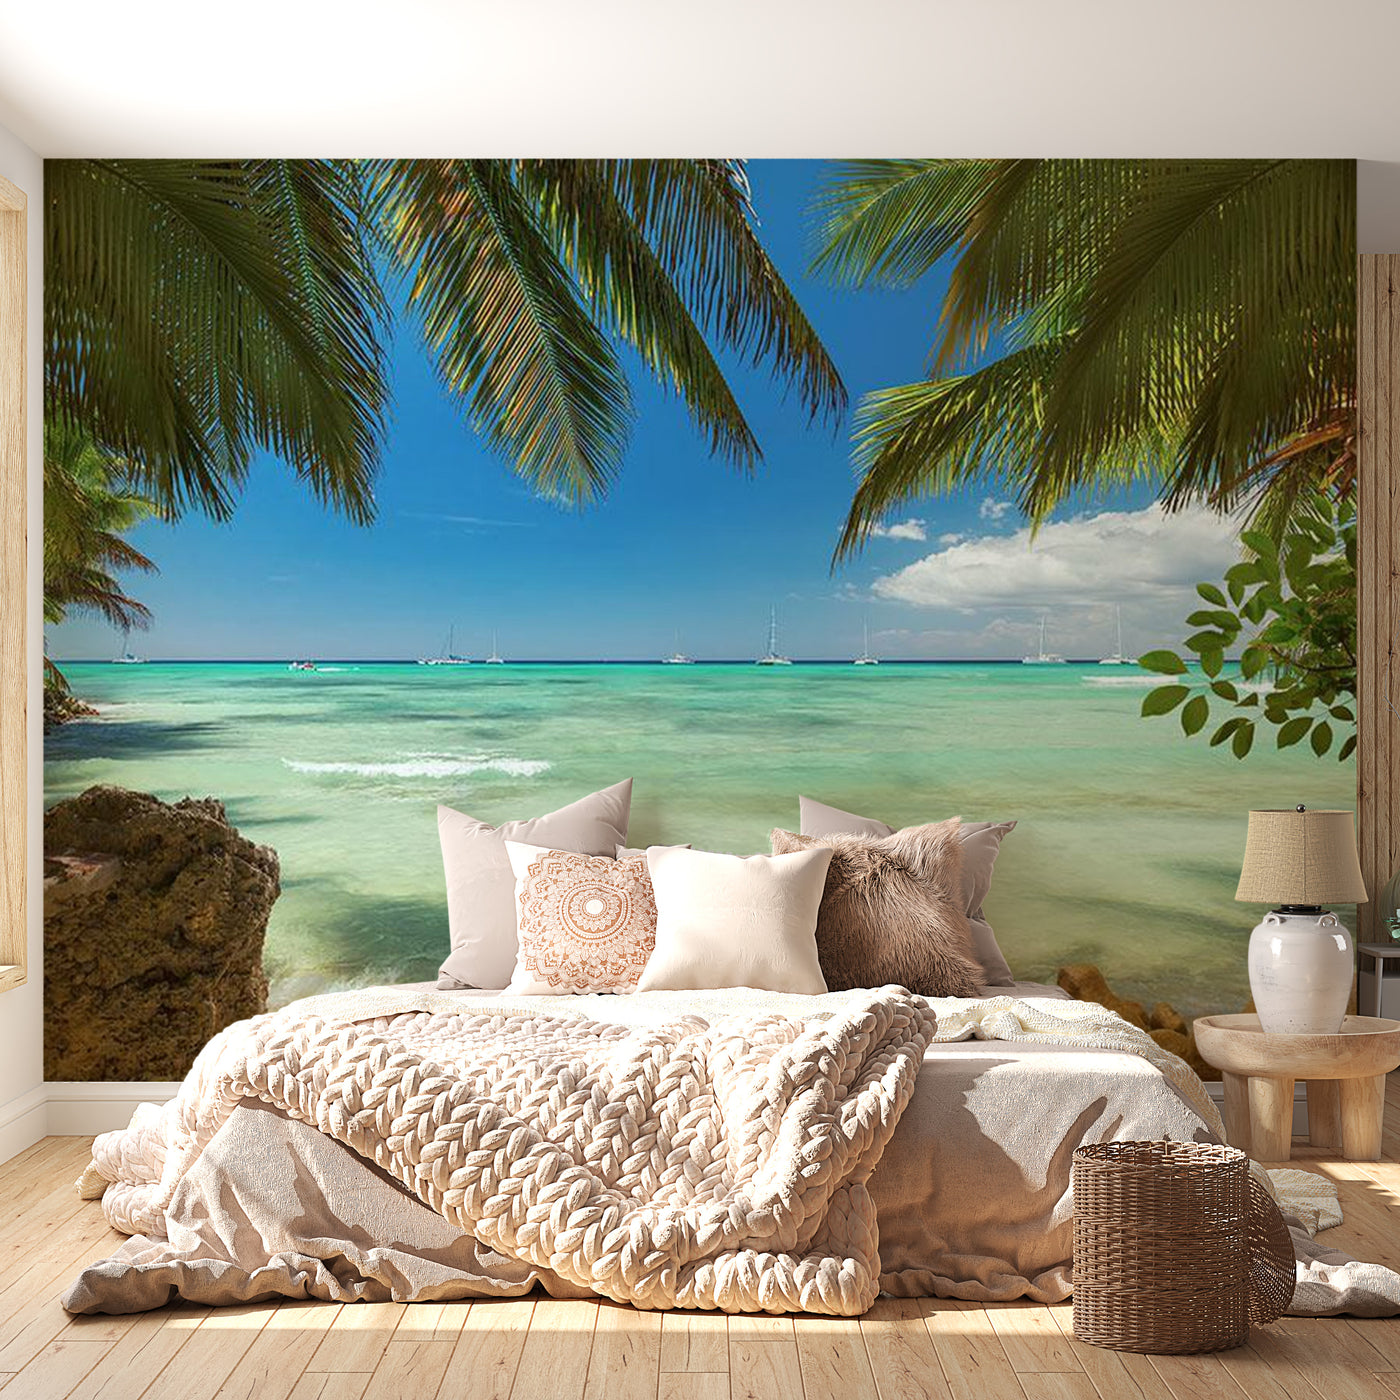 Peel & Stick Beach Wall Mural - Relaxing On The Beach - Removable Wall Decals